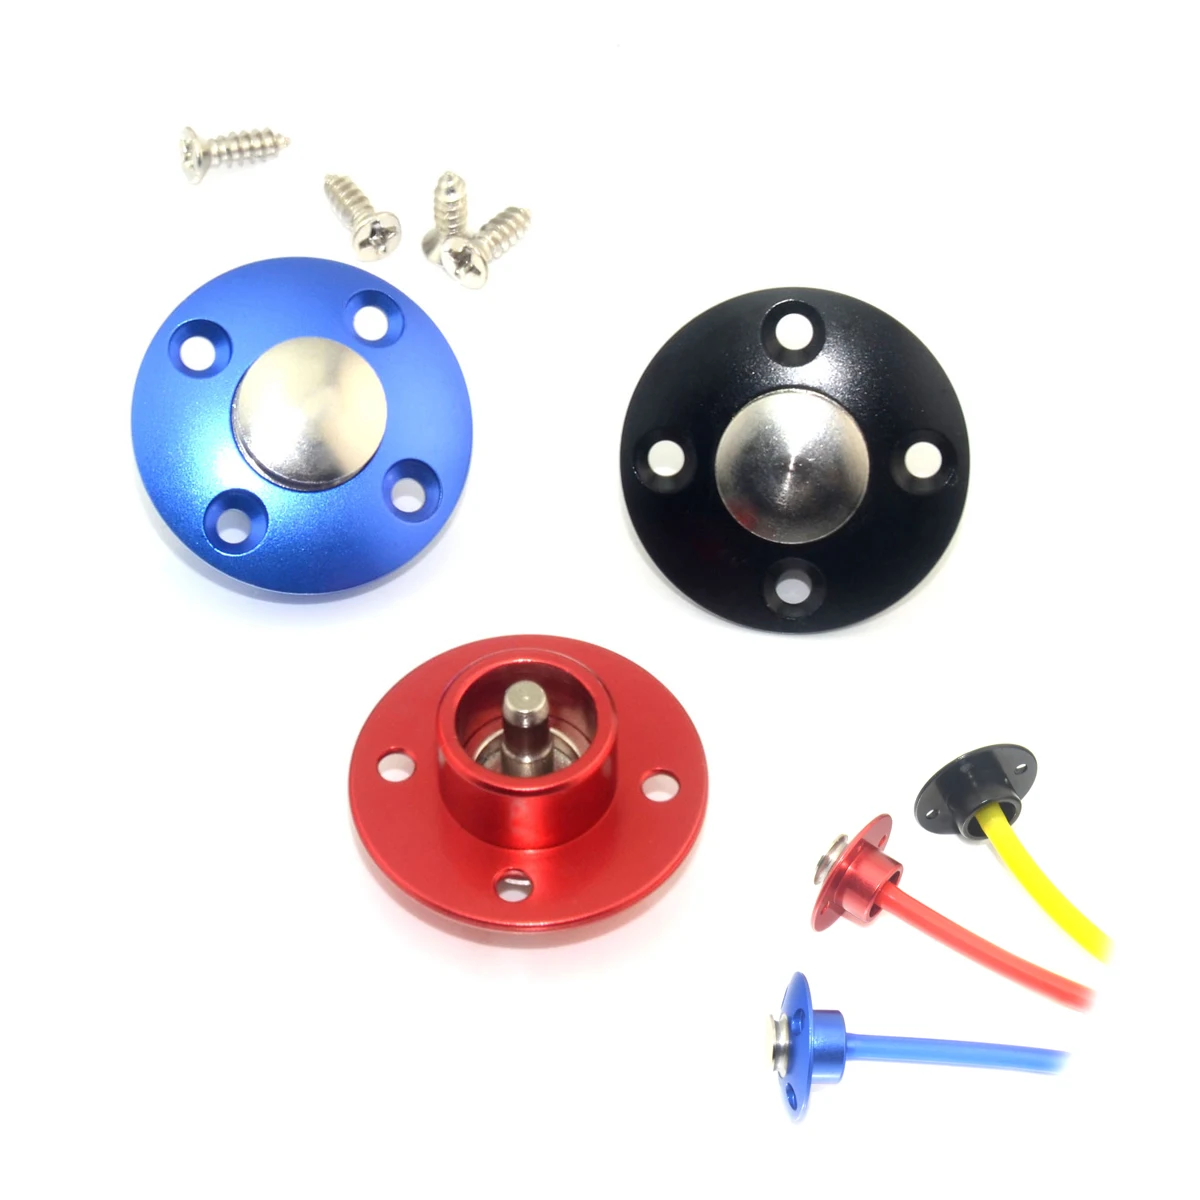 

KUZA CNC Alloy Magnetic Fuel Filler Dot Plug Port for RC Aircraft Smoking System Fuel Gas Airplane Fuel Filler Port Drone Boat